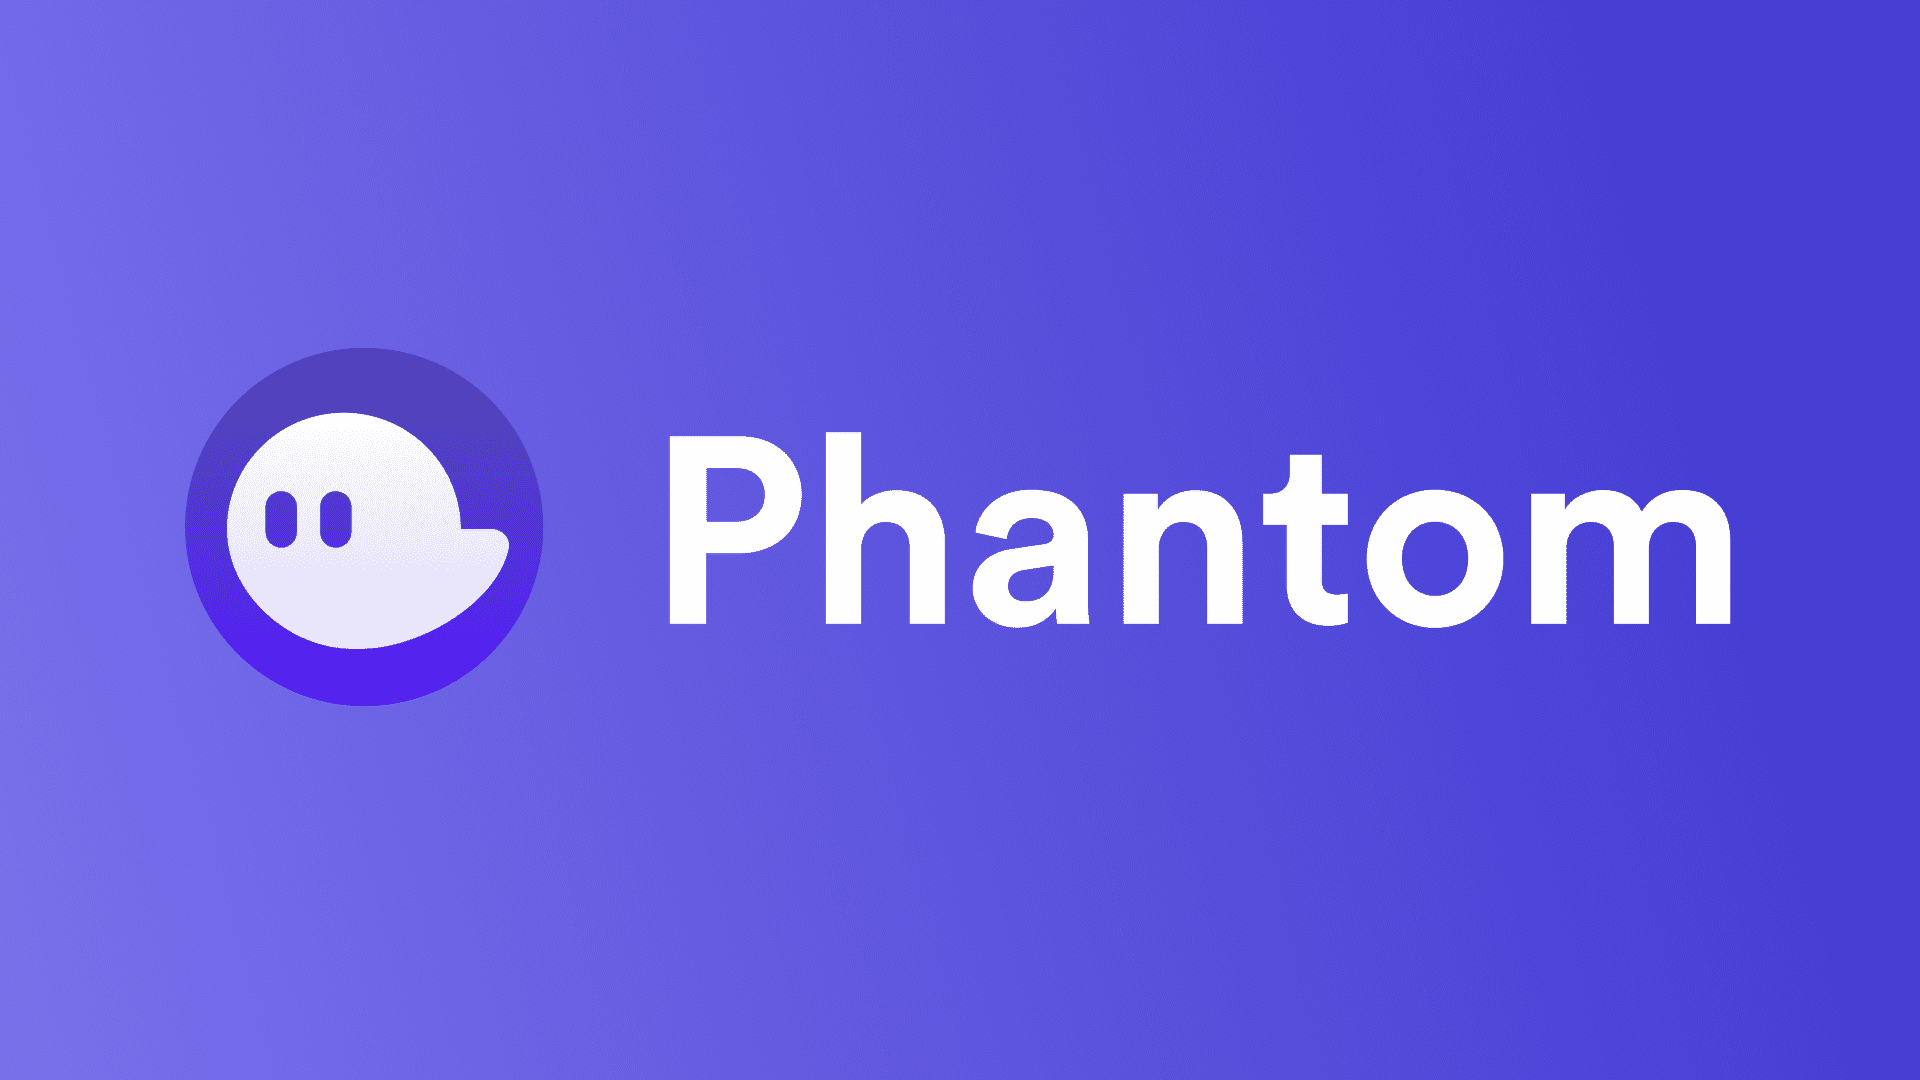 Phantom Wallet Ascends to Top Three in App Store, Boosting Solana Sentiment